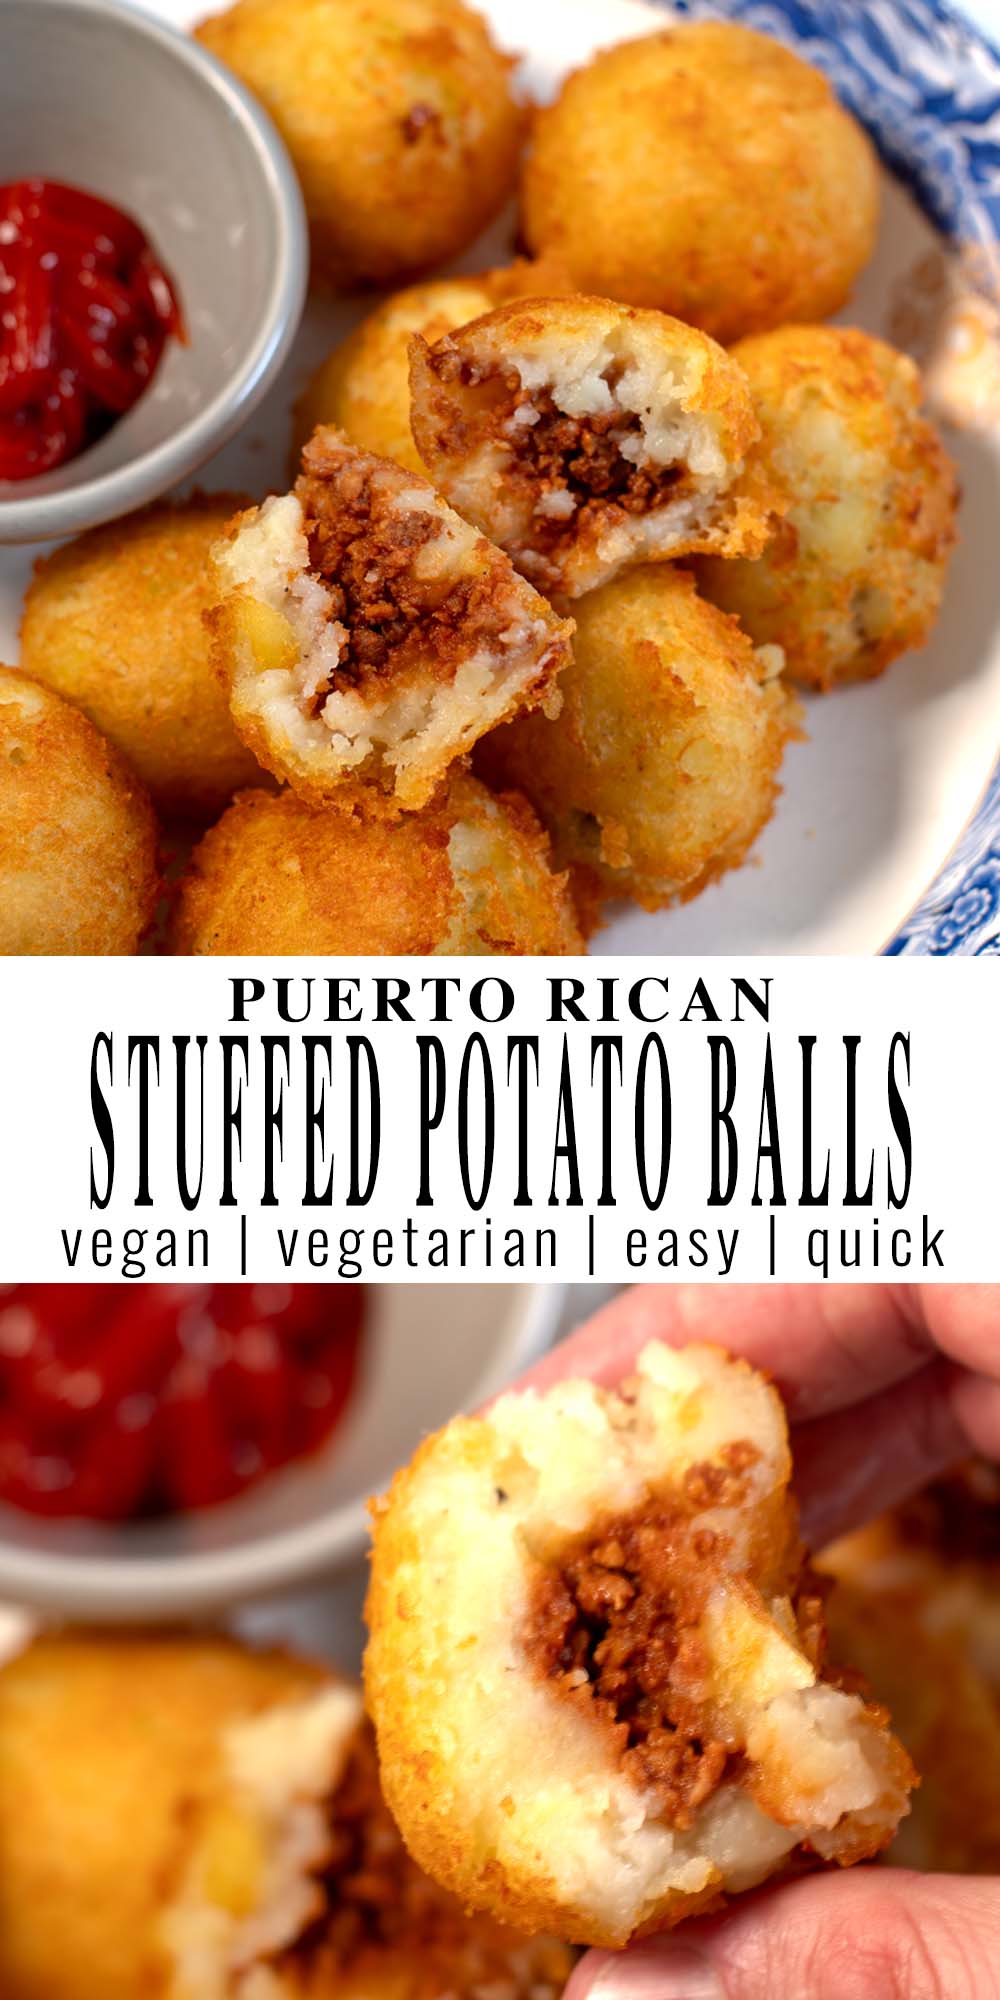 Collage of two photos showing Puerto Rican Stuffed Potato Balls with recipe title.